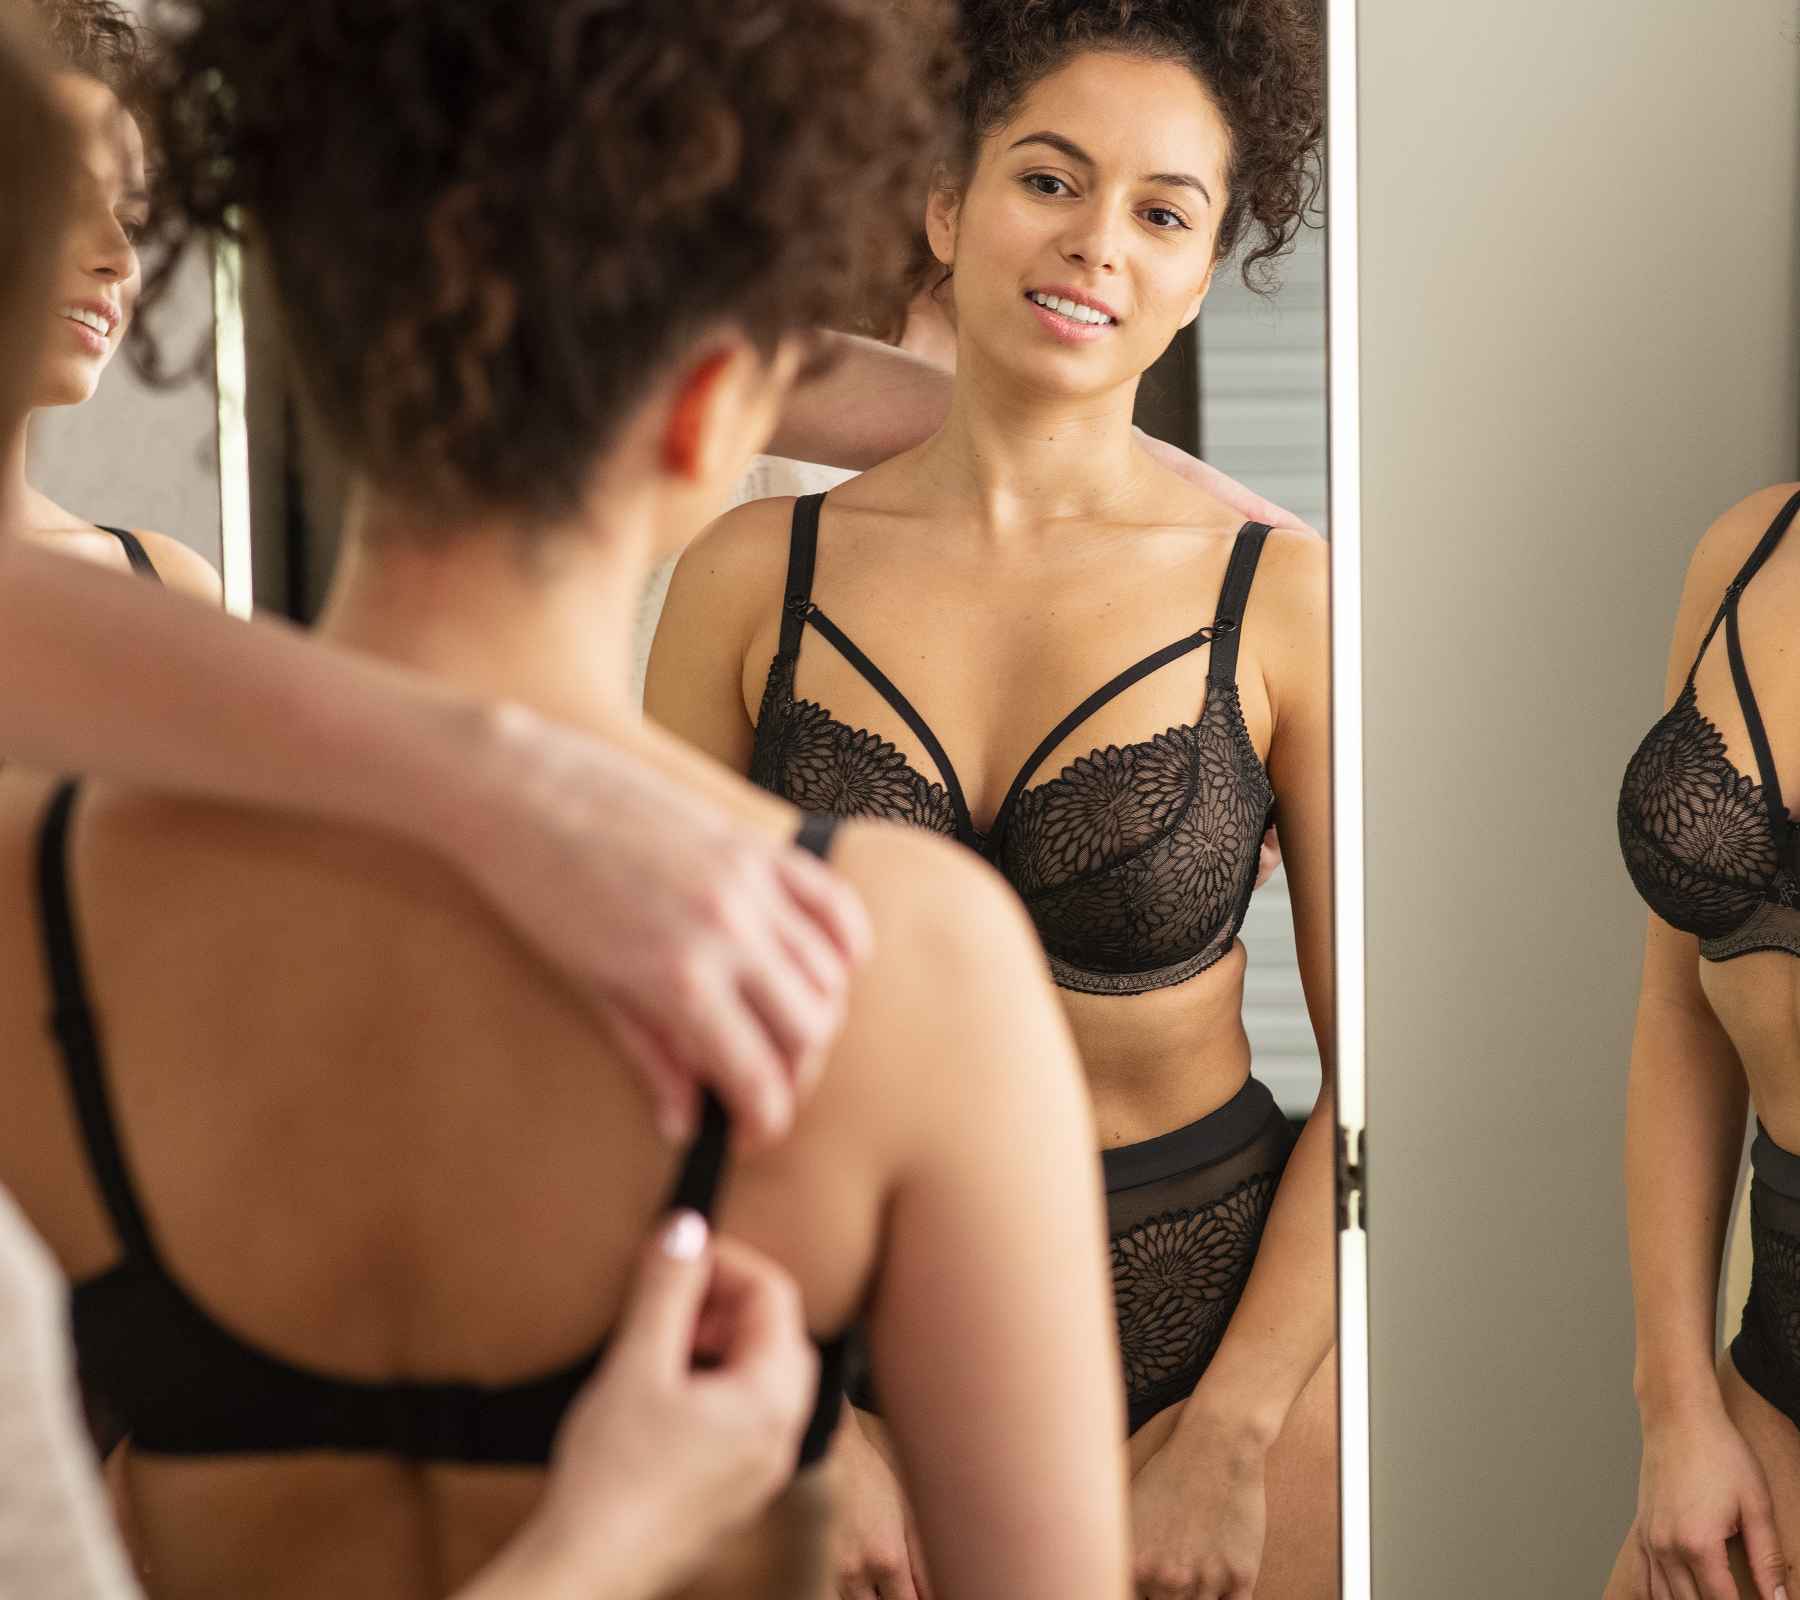 5 Important Questions Women Should Ask About Bras (And Answers)